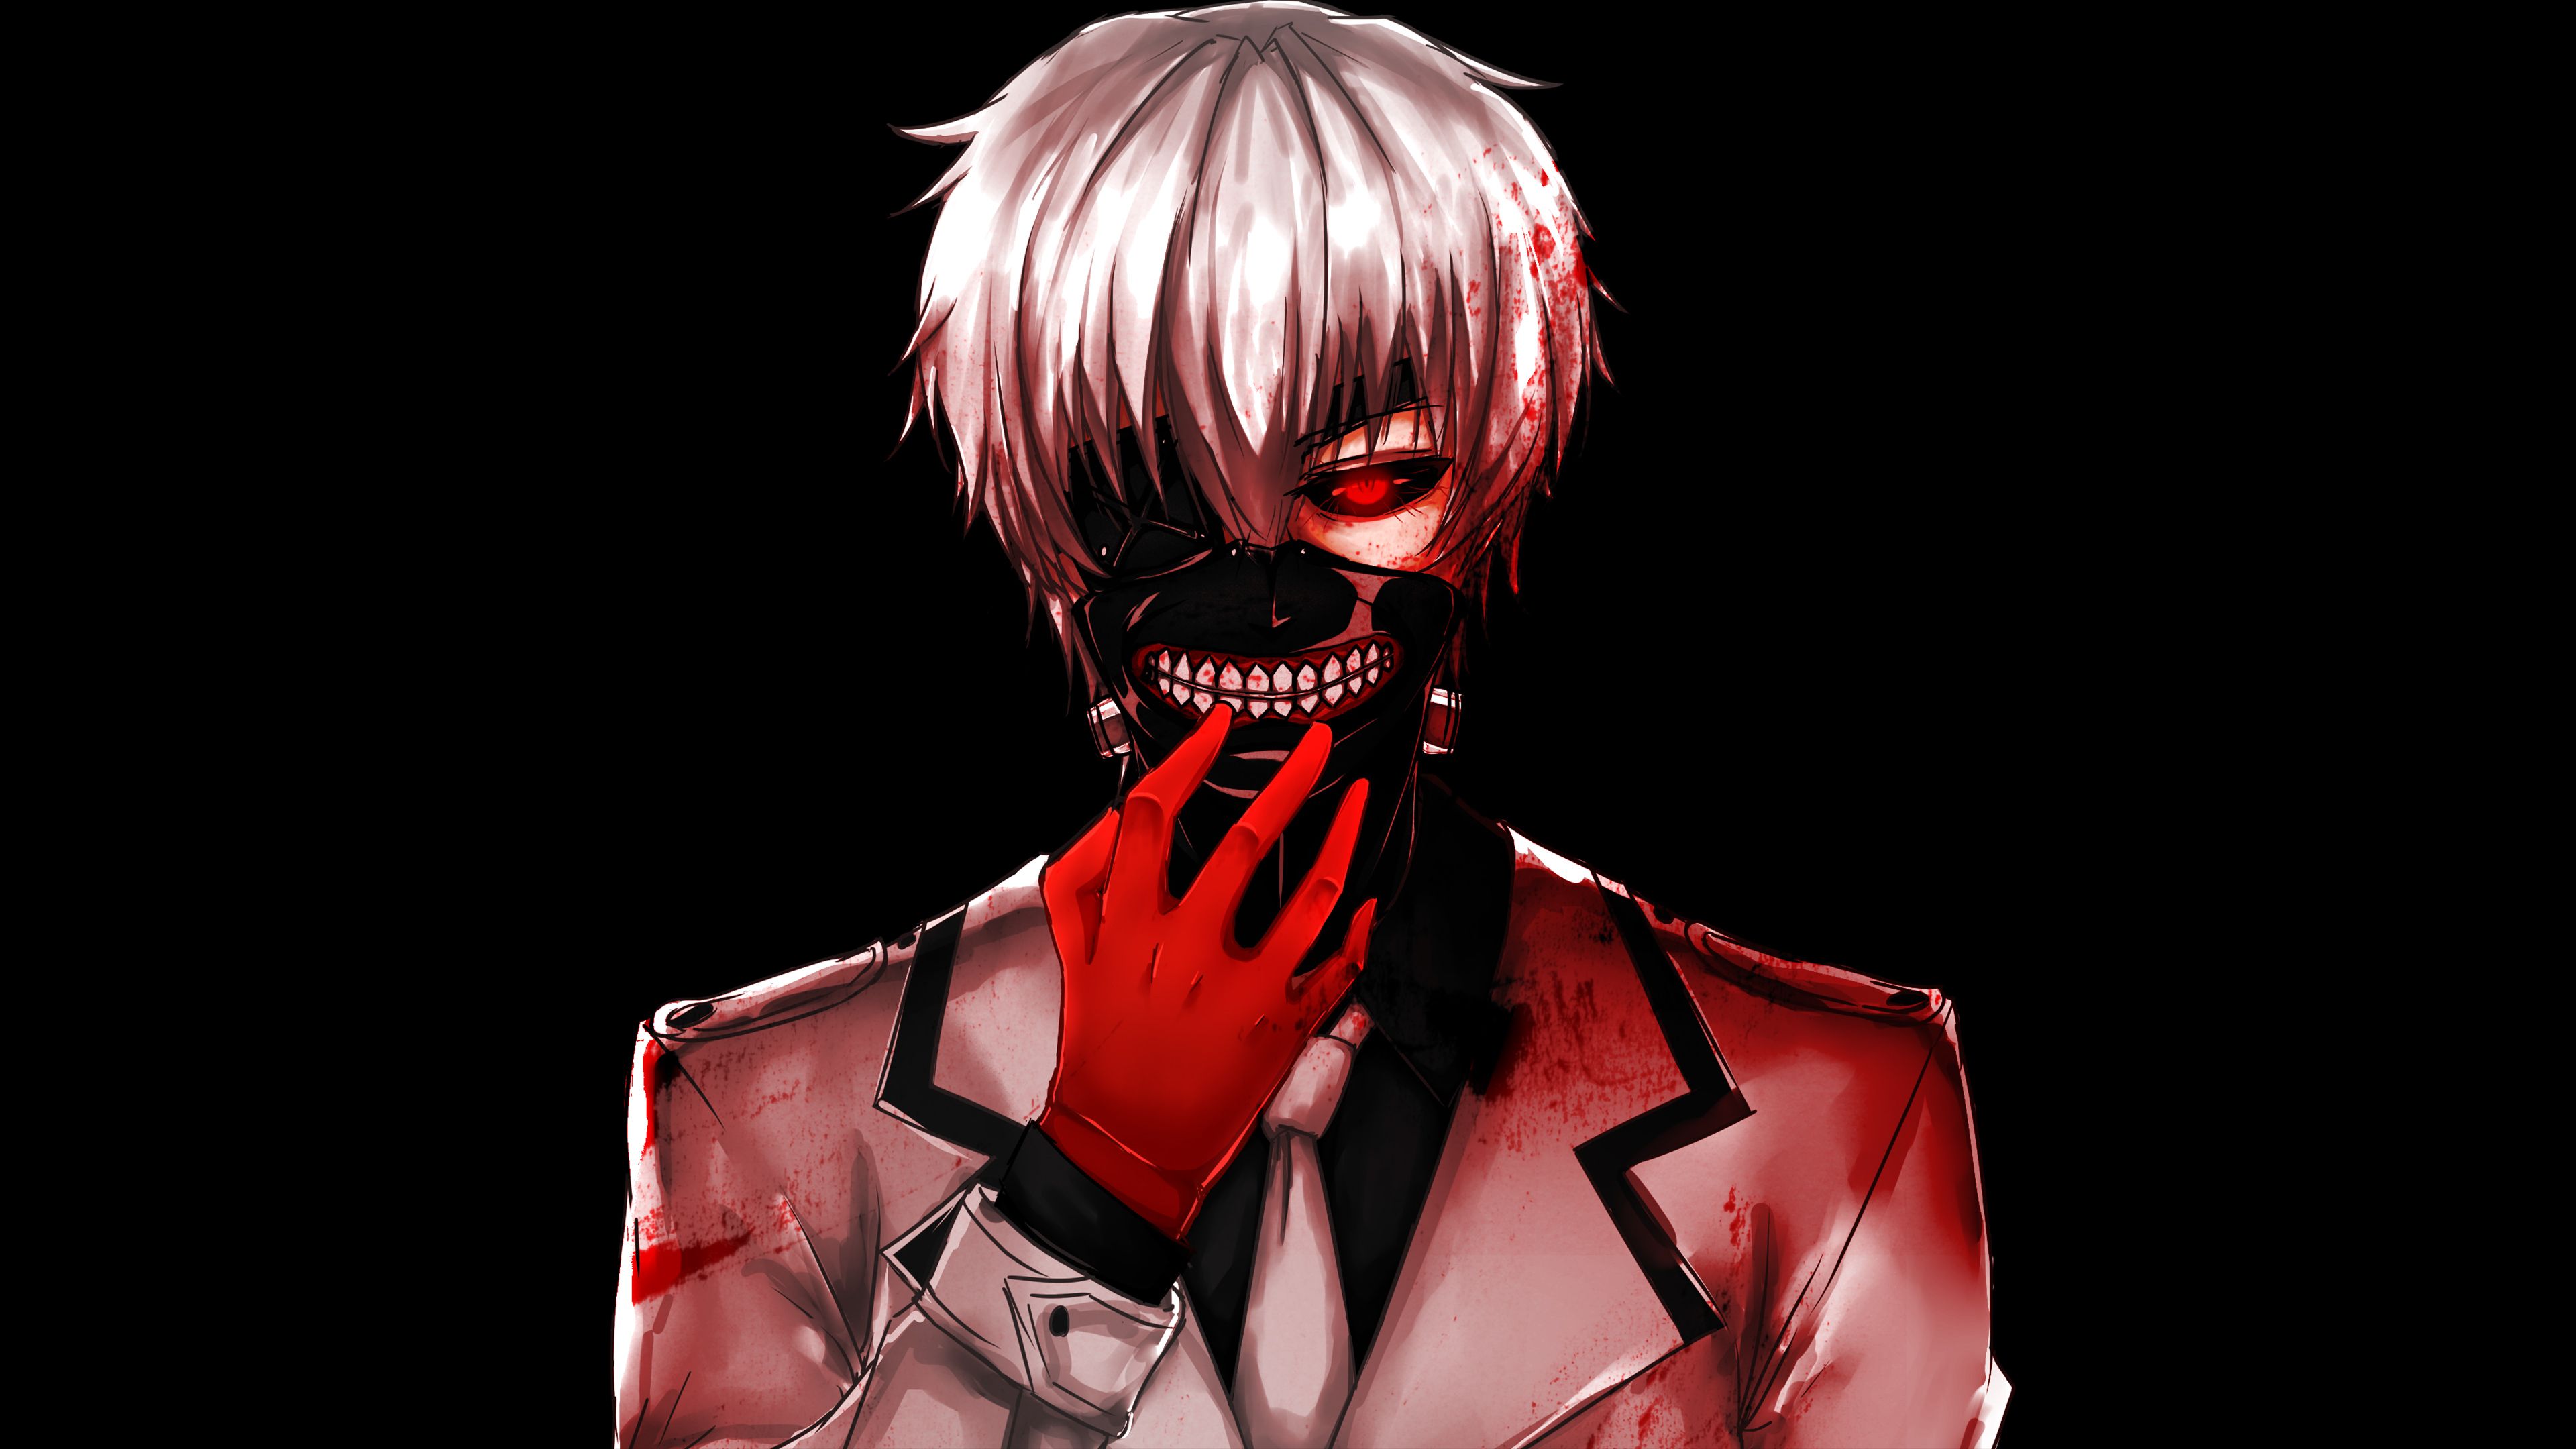 21545 Tokyo Ghoul Wallpaper HD  Android iPhone Desktop HD Backgrounds   Wallpapers 1080p 4k HD Wallpapers Desktop Background  Android   iPhone 1080p 4k 1080x753 2023